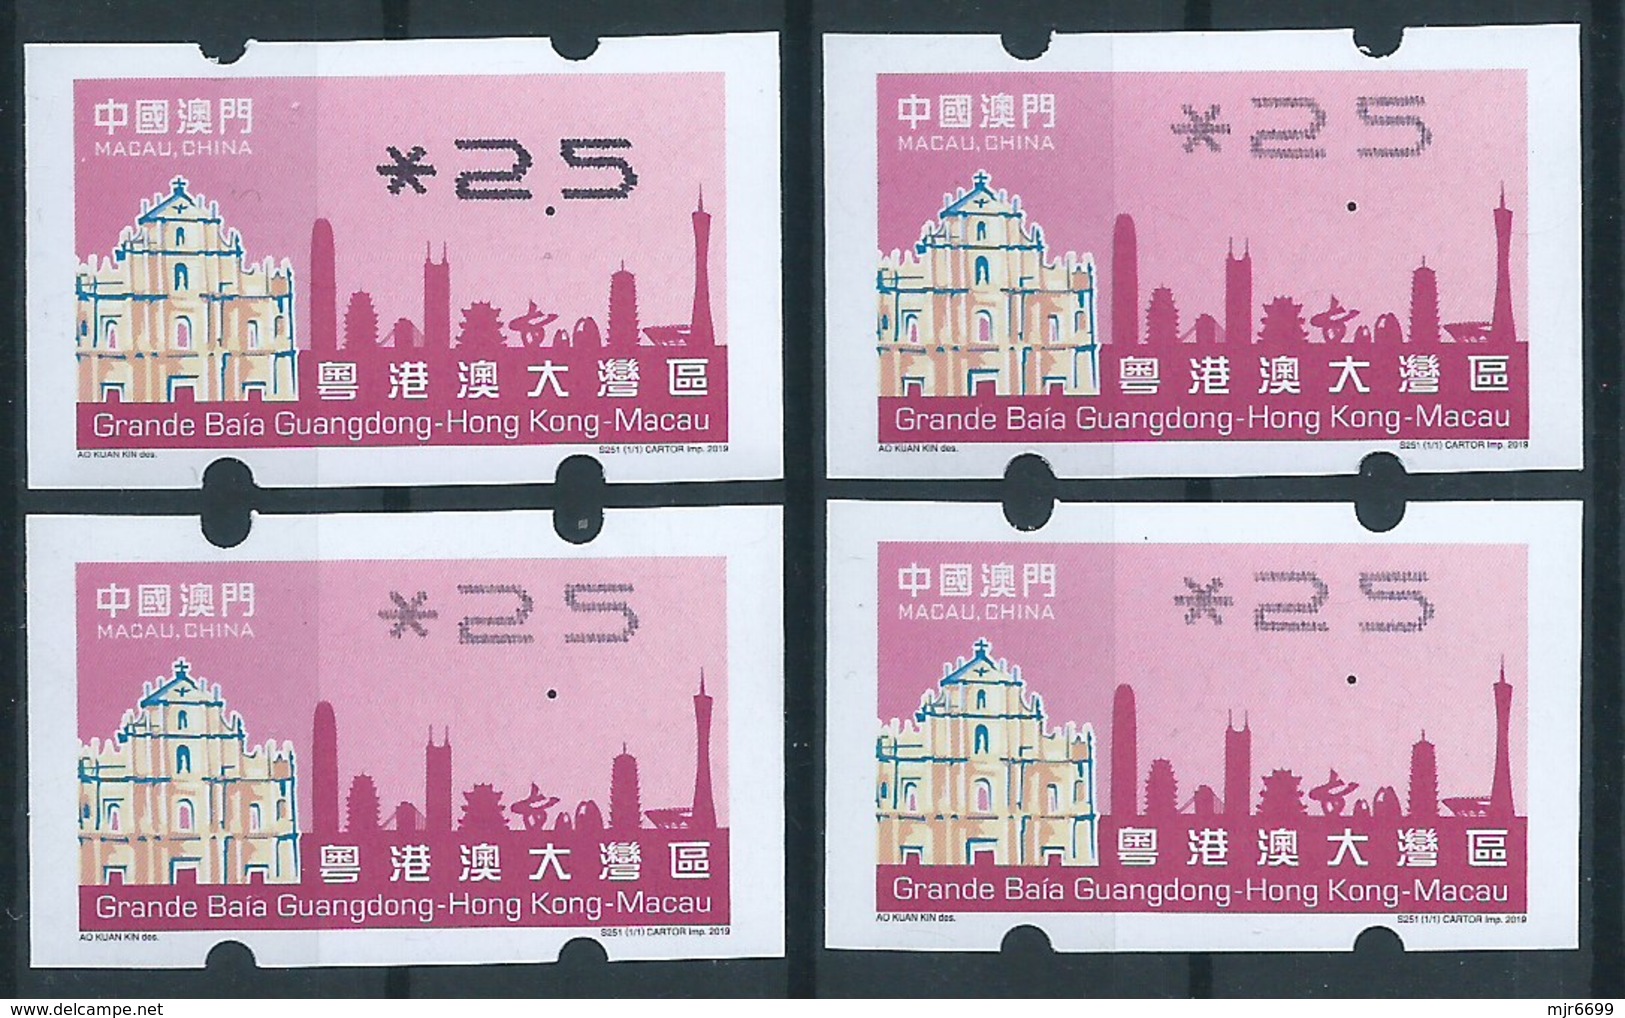 MACAU 2019 GUANDGONG, H.K. & MACAU GREAT BAY ATM LABELS 2.50PATACAS SHIFTED UP PRINT LOT OF 3, NORMAL FOR COMPARE - Distribuidores